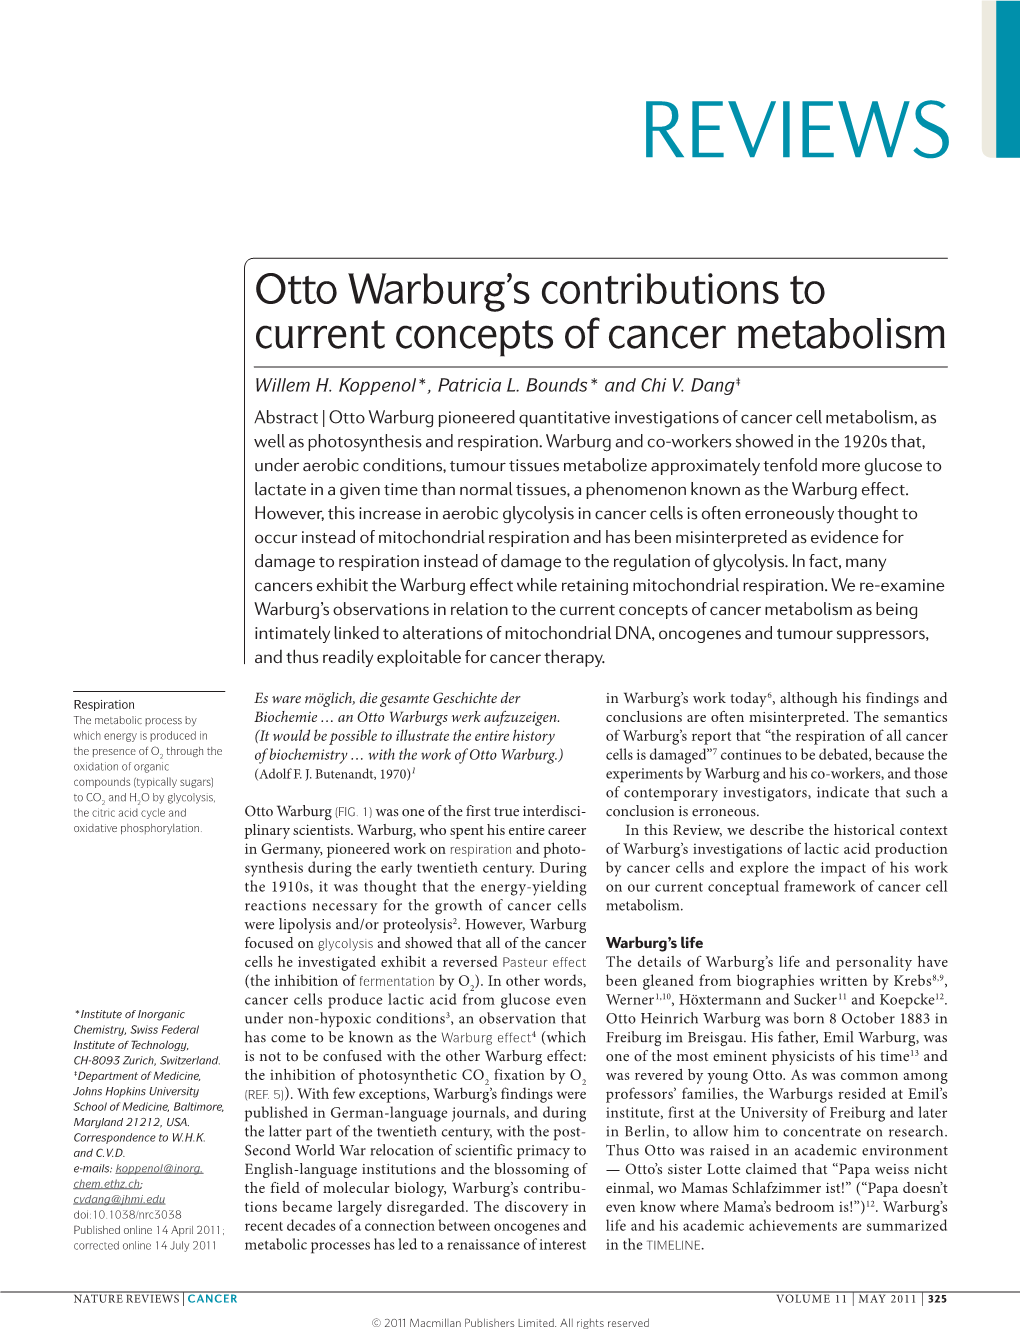 Otto Warburg's Contributions to Current Concepts of Cancer